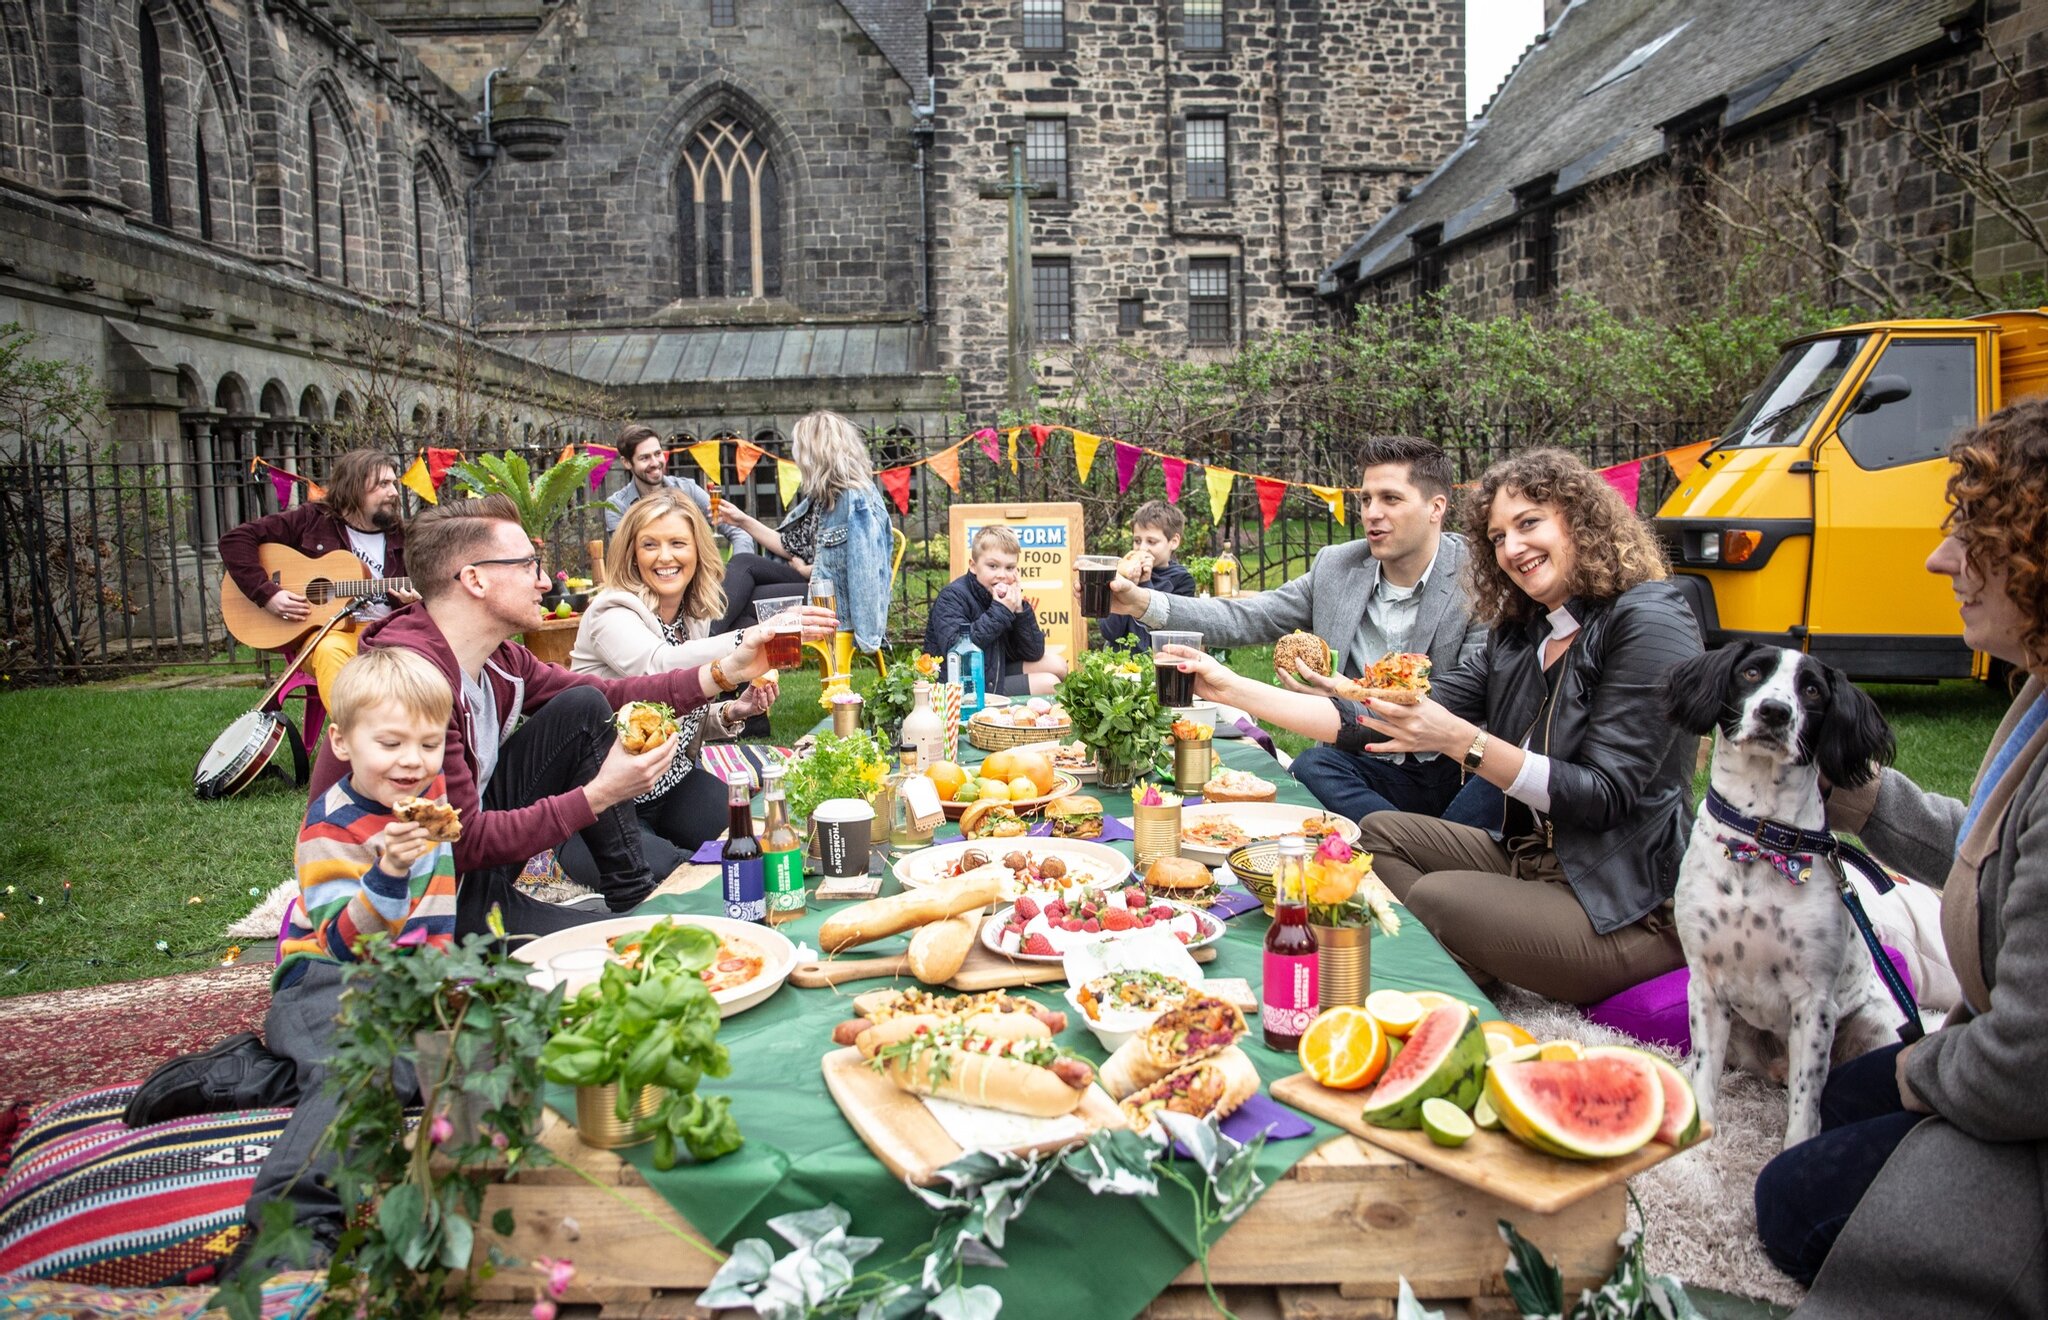 The Paisley Food and Drink Festival is the largest outdoor event of its kind in Scotland and showcases the best of the country's street food scene.